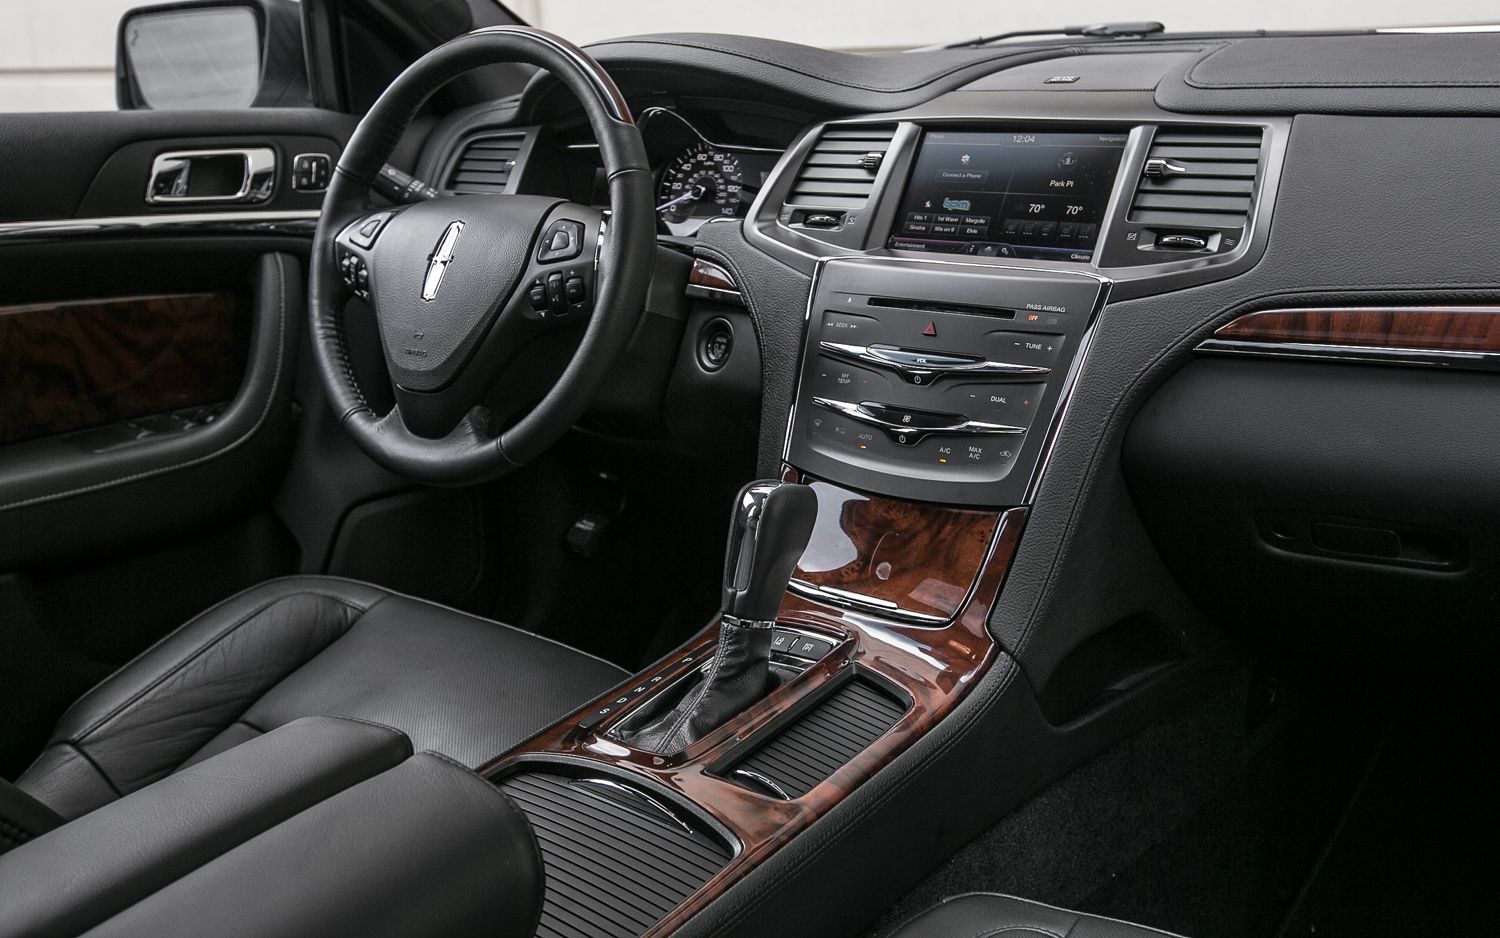 Interior and dashboard of the 2013 MKS. | Lincoln mkx, Lincoln mks, New cars